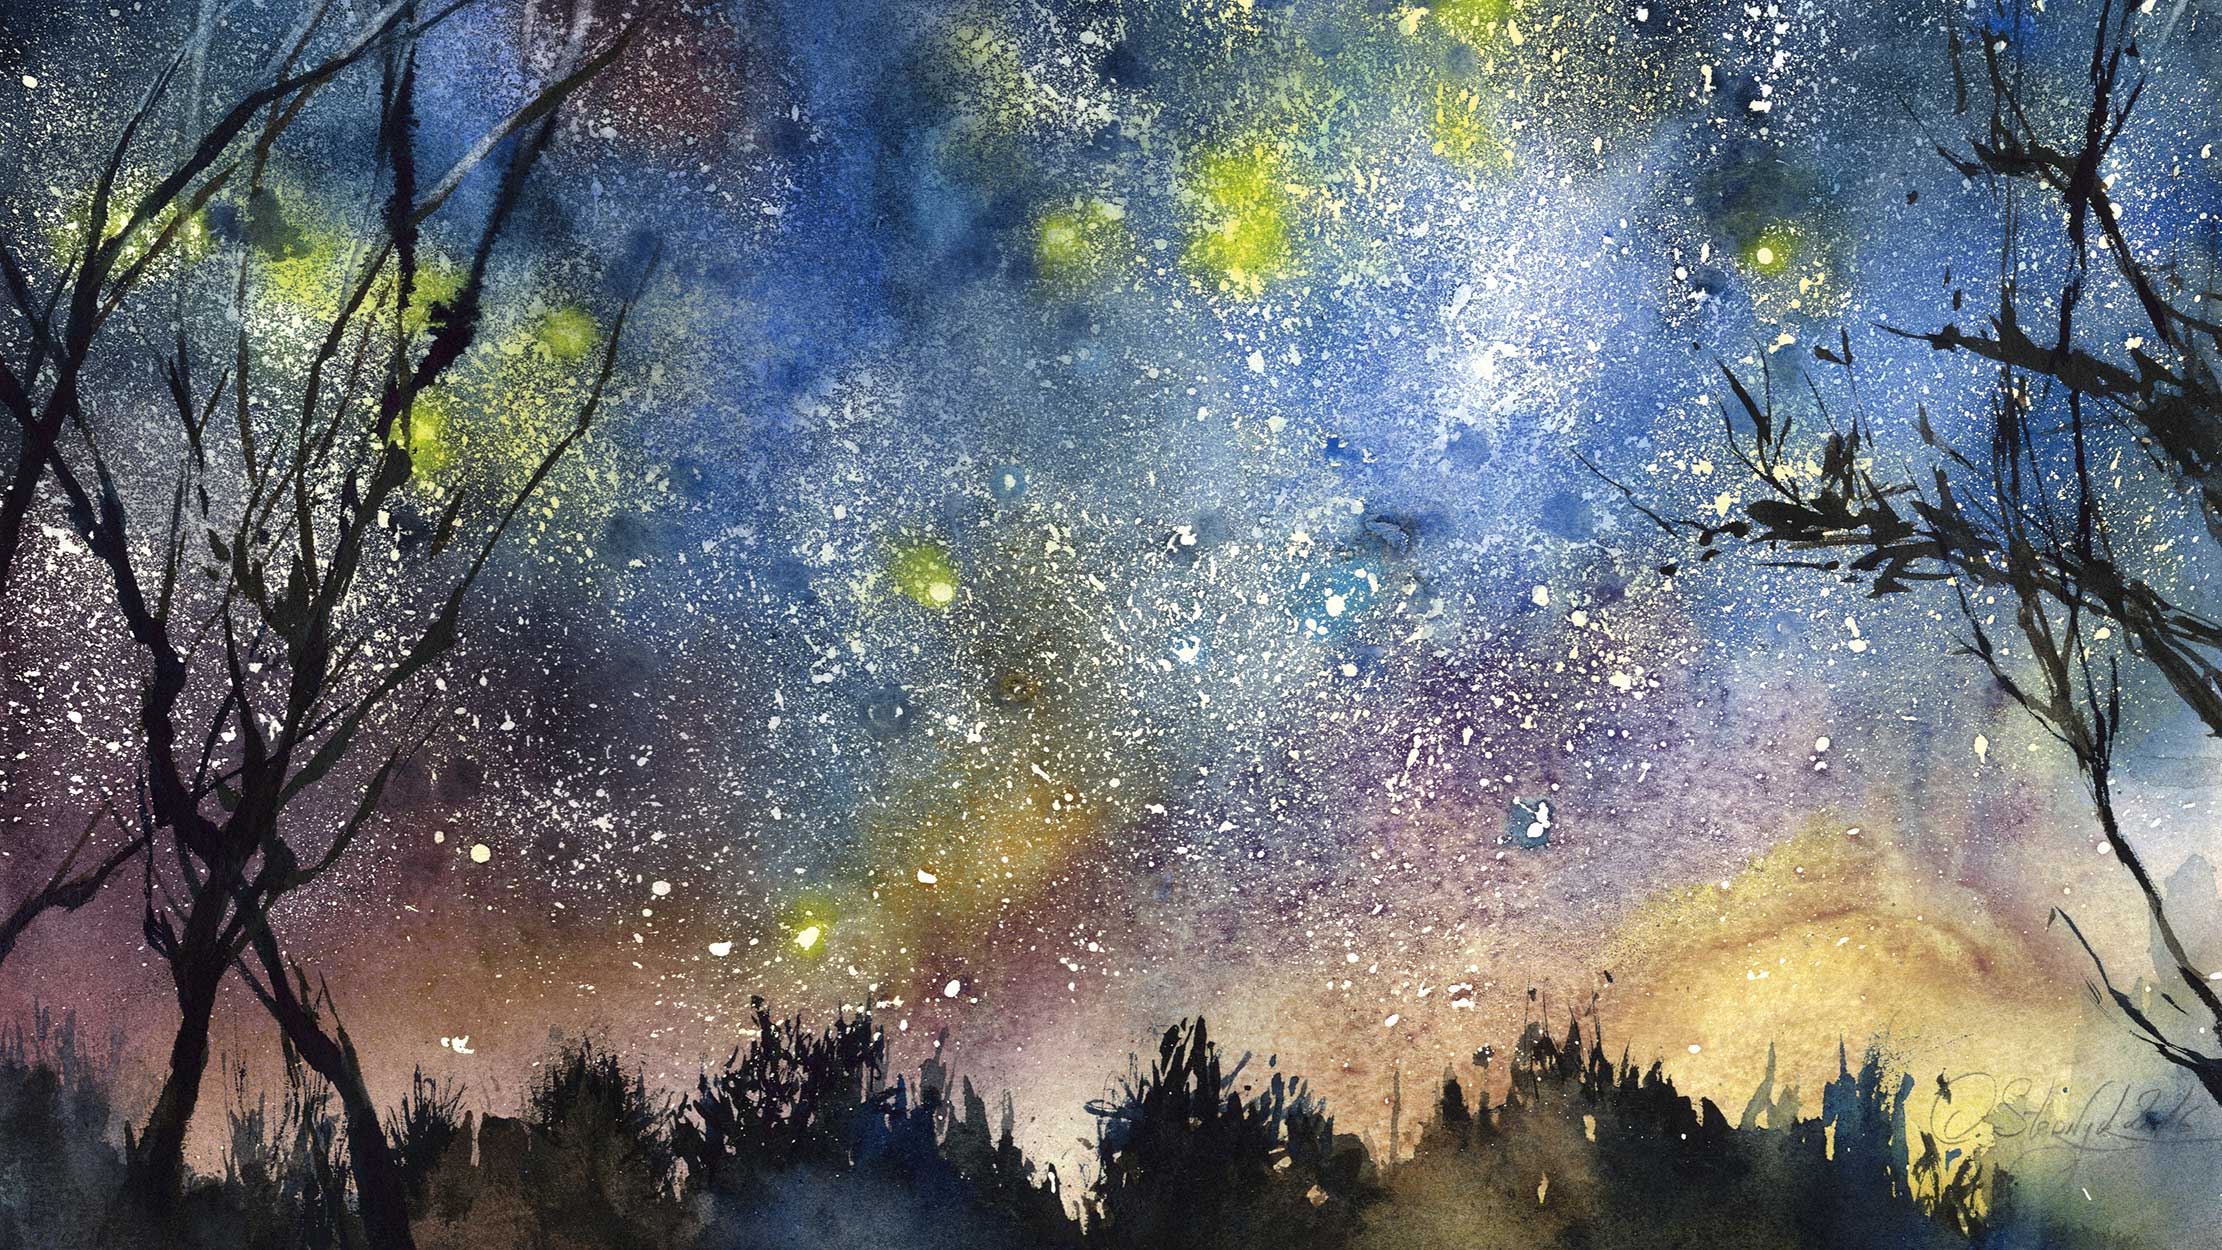 Download Three Steps To A Sparkling Night Sky In Watercolour Creative Bloq